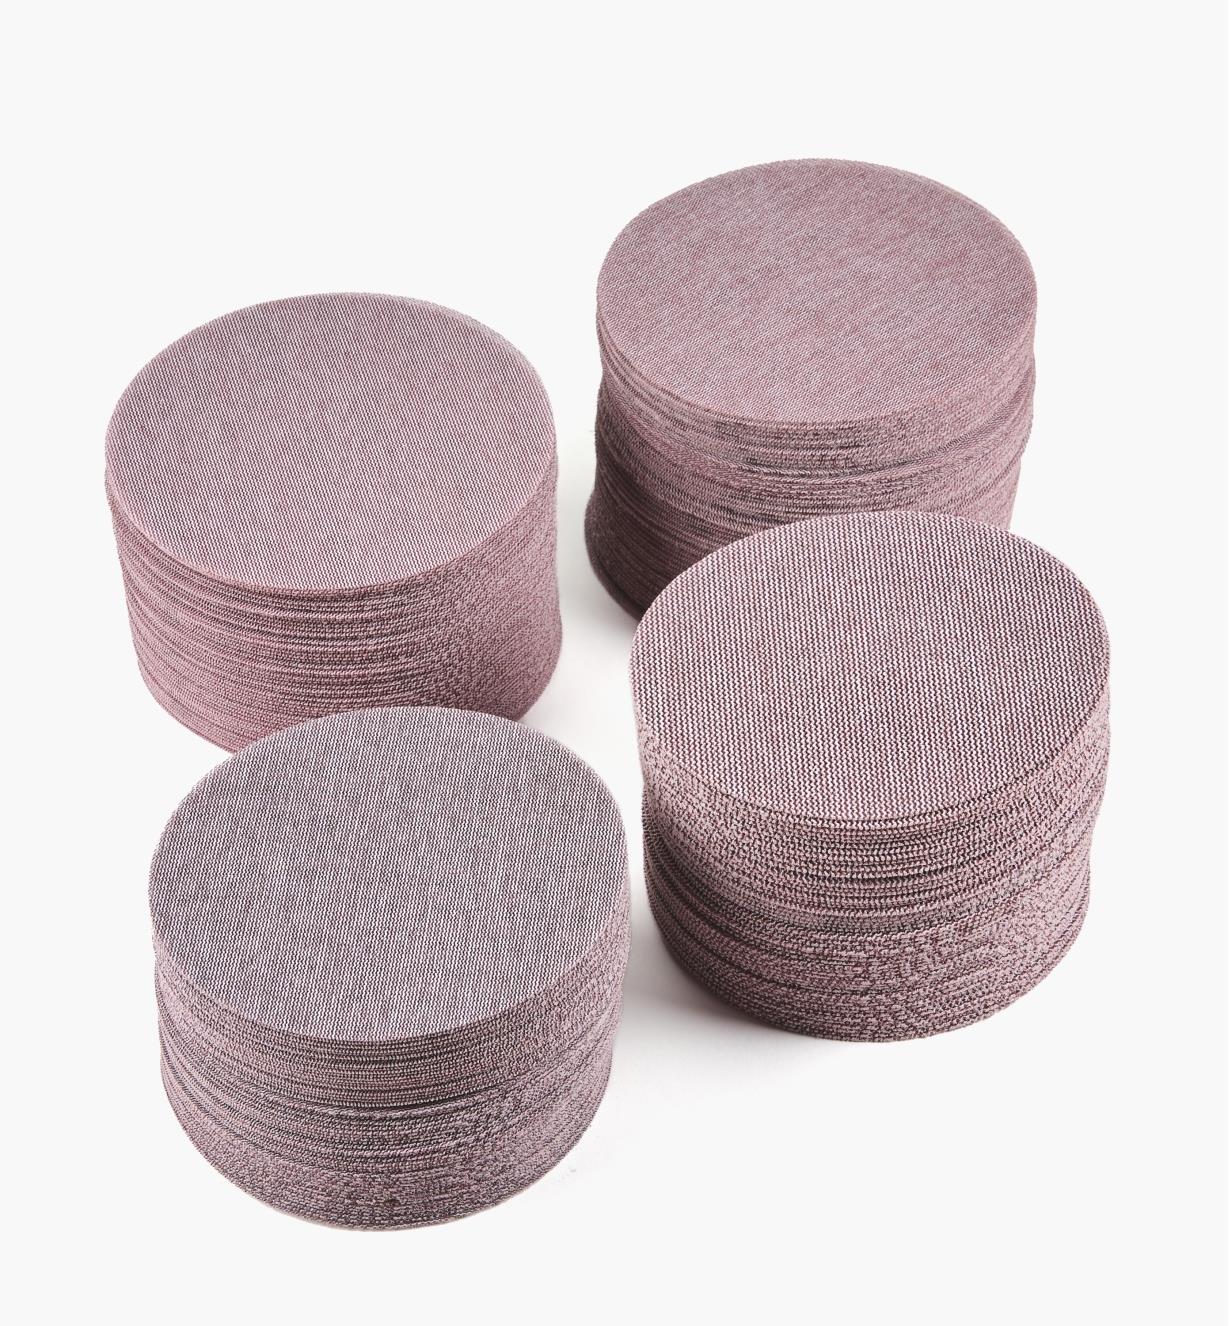 50 of each of the 80x, 120x, 150x and 180x Abranet Grip mesh abrasive discs